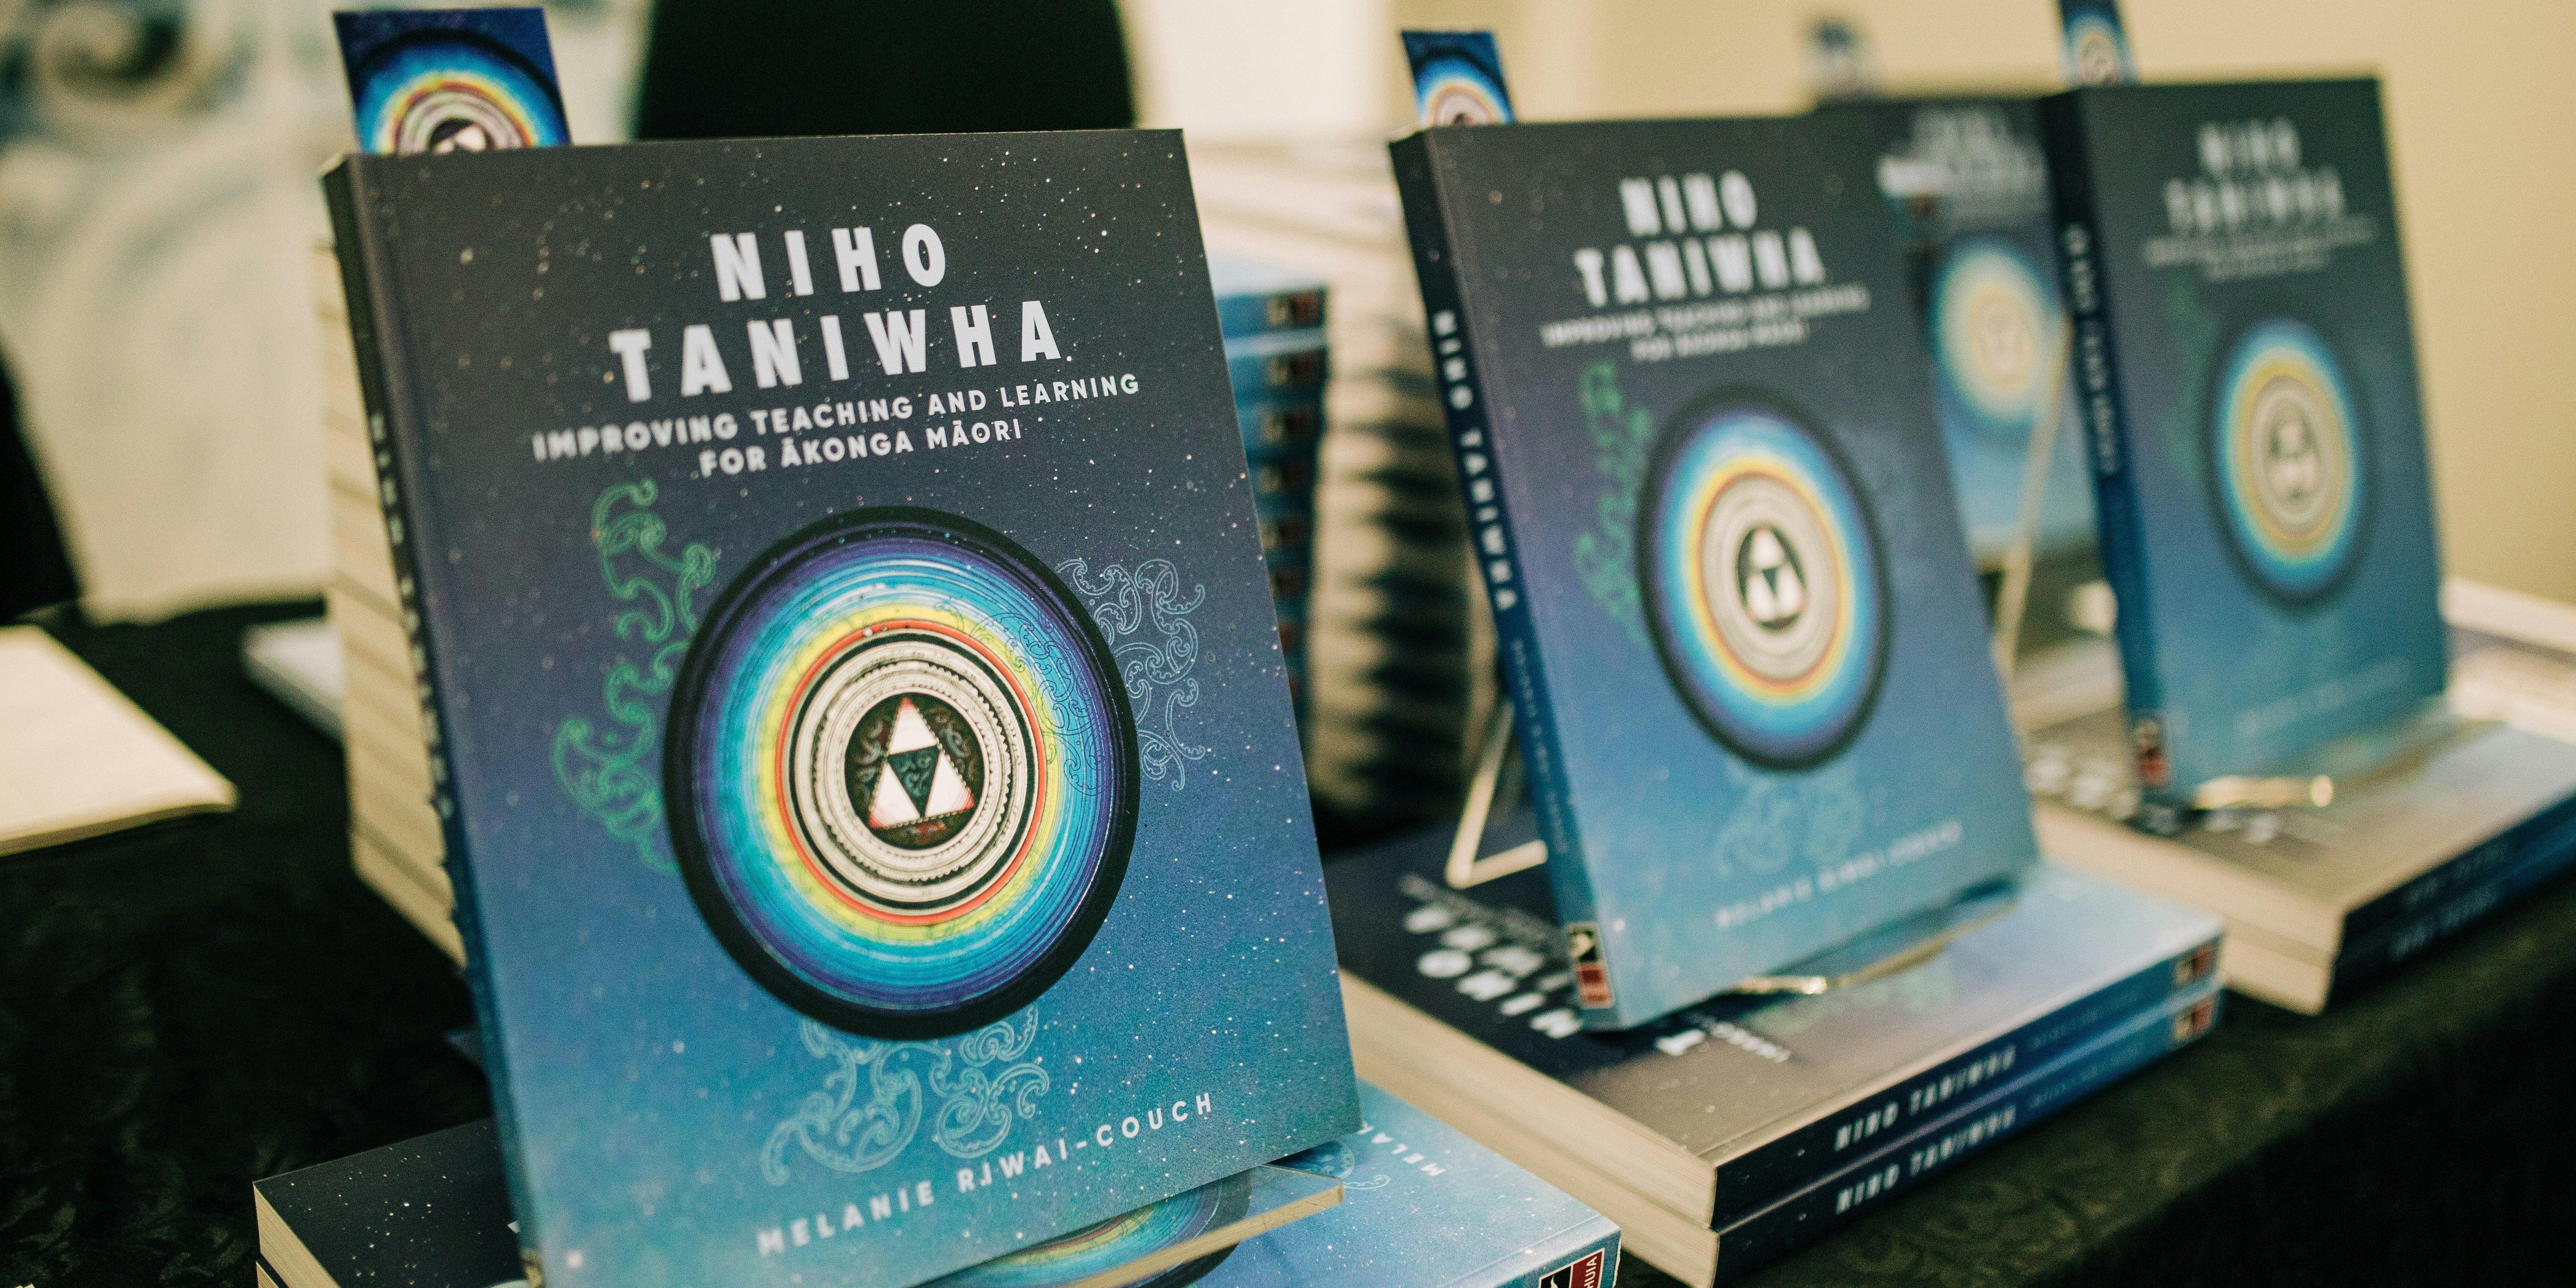 Copies of 'Niho Taniwha' written by Dr Melanie Riwai-Couch displayed on a table